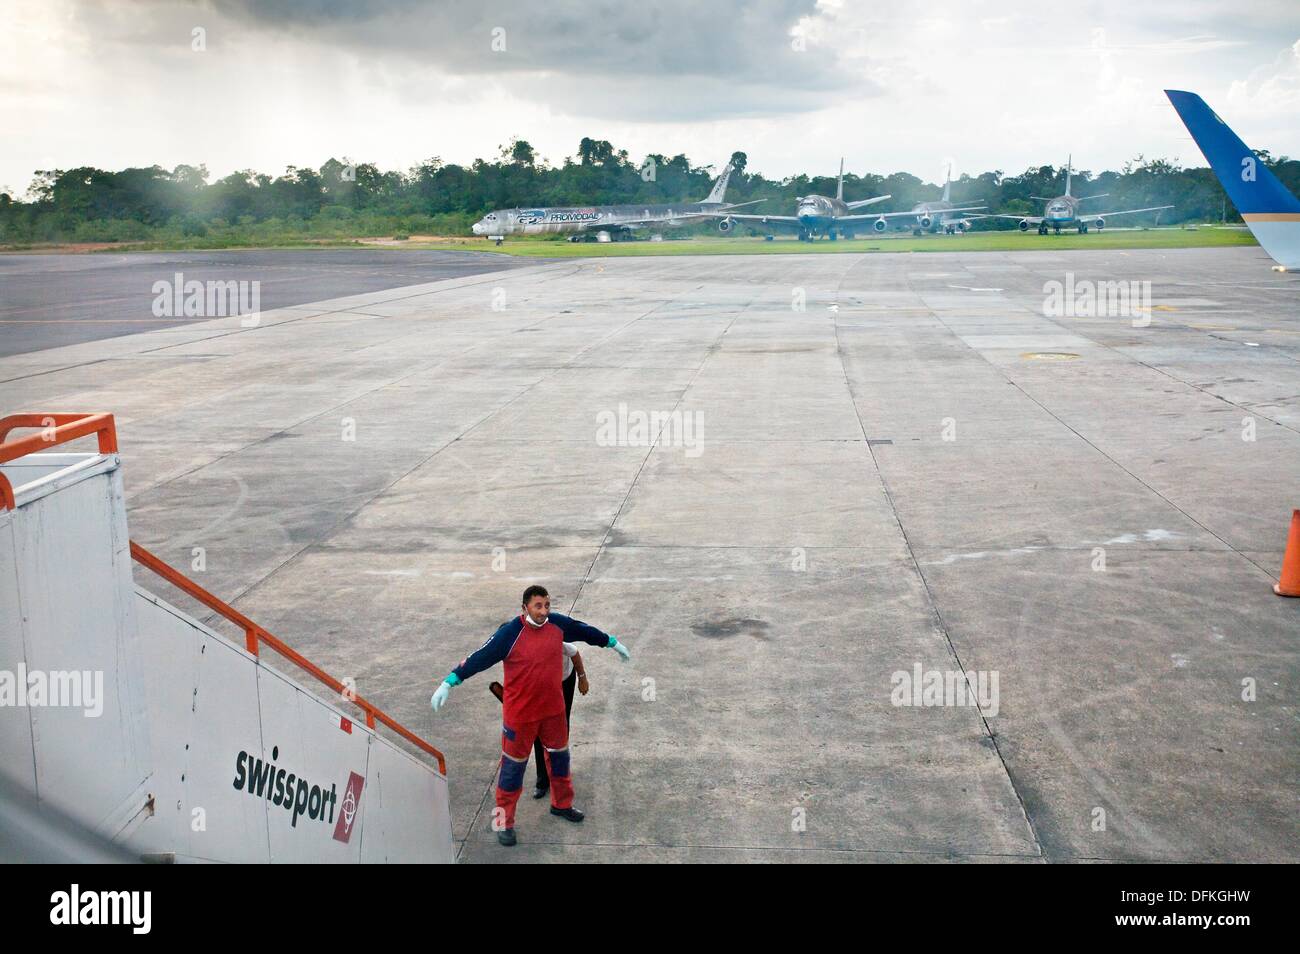 Security personel checking a maintenance person before entering the plane, Manaus  Amazonas state, the Amazon, Brazil. Stock Photo